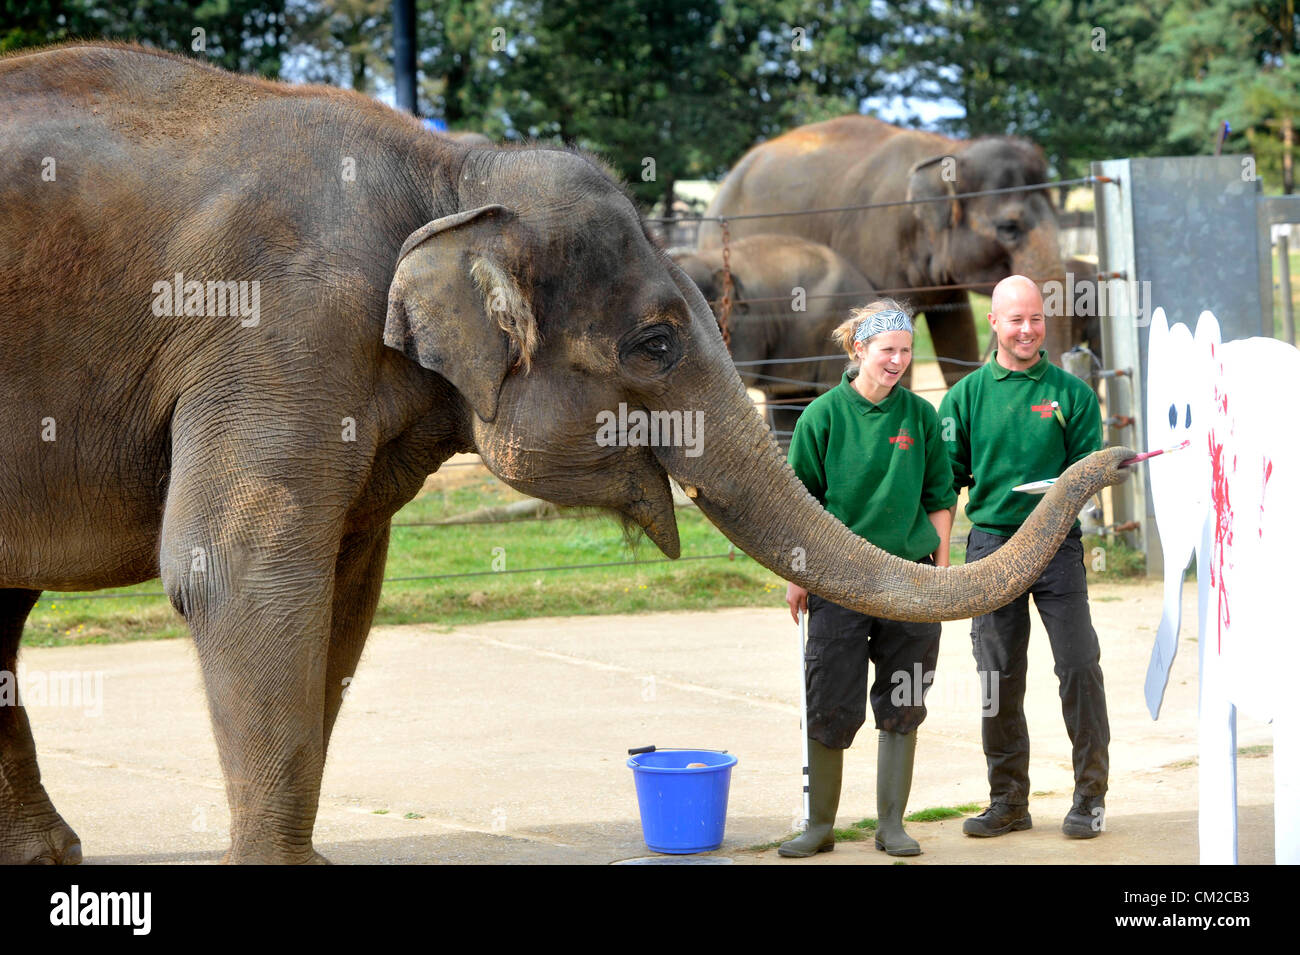 Bedfordshire, UK. 19th September 2012. Elephant artist picks up a paintbrush for Elephant Appreciation Weekend         ZSL Whipsnade Zoo’s pachyderm Picasso is preparing to pick up a paintbrush and show off her artistic talents ahead of Elephant Appreciation Weekend, Elephantasia.    Fourteen-year-old Asian elephant Karishma will be using her trunk to decorate wooden elephants with colourful splashes of paint in the run up to the weekend – which will be raising vital funds for the Zoo’s worldwide elephant conservation and research projects.    Elephant keeper Elizabeth Becker said: “Karishma r Stock Photo